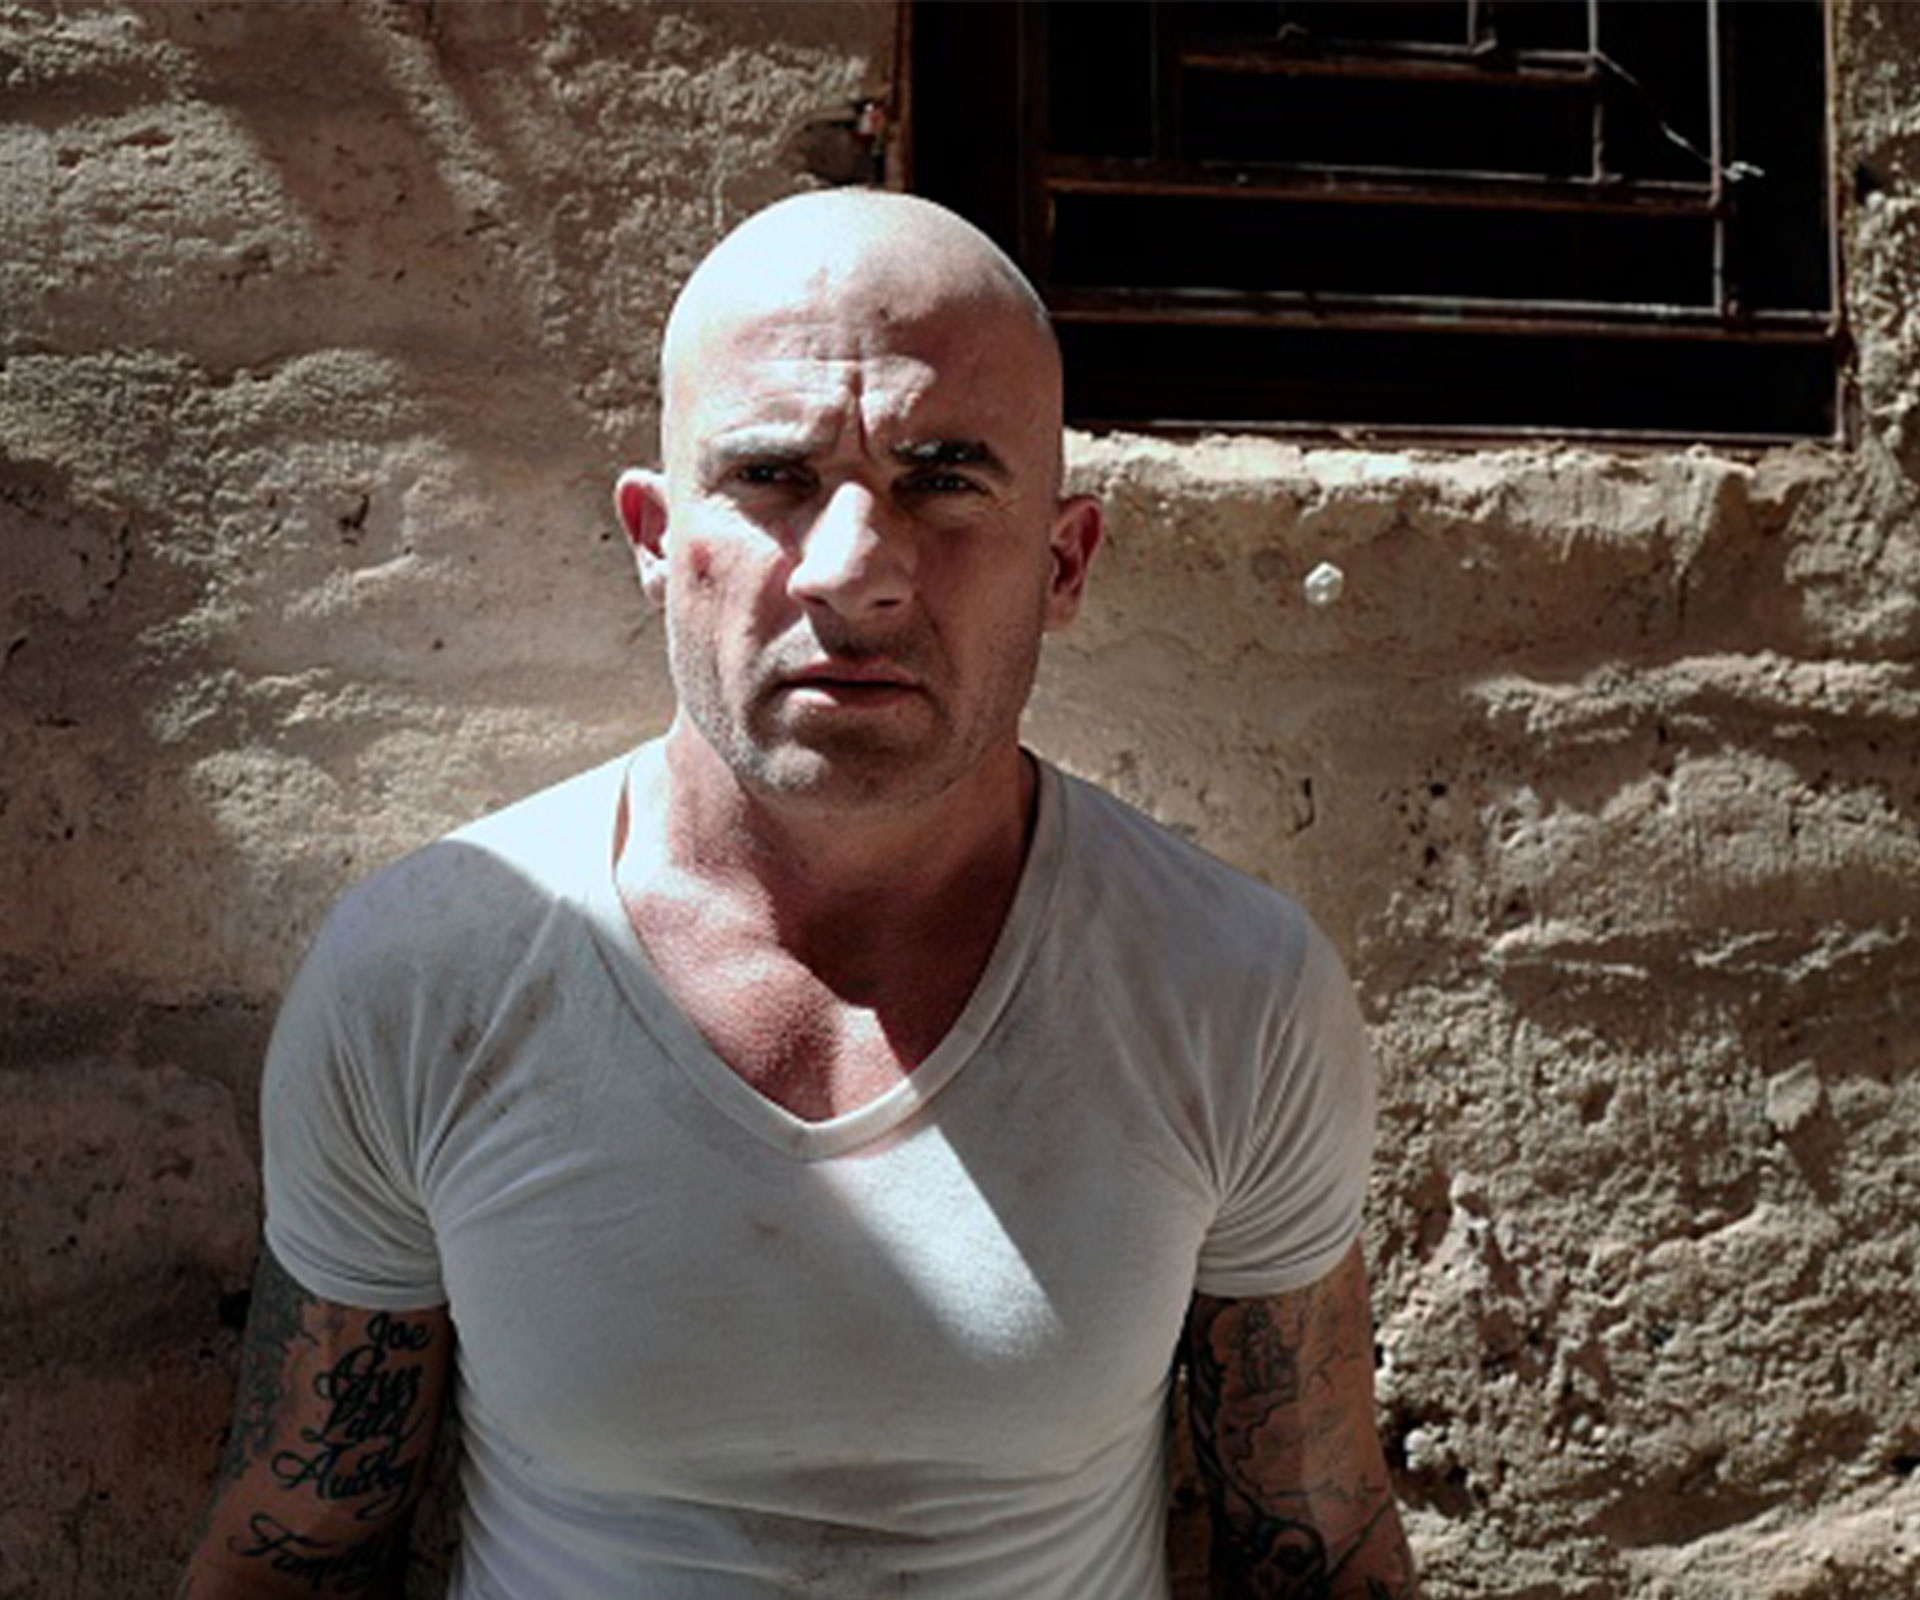 Dominic Purcell opens up about his near death experience on the set of Prison Break